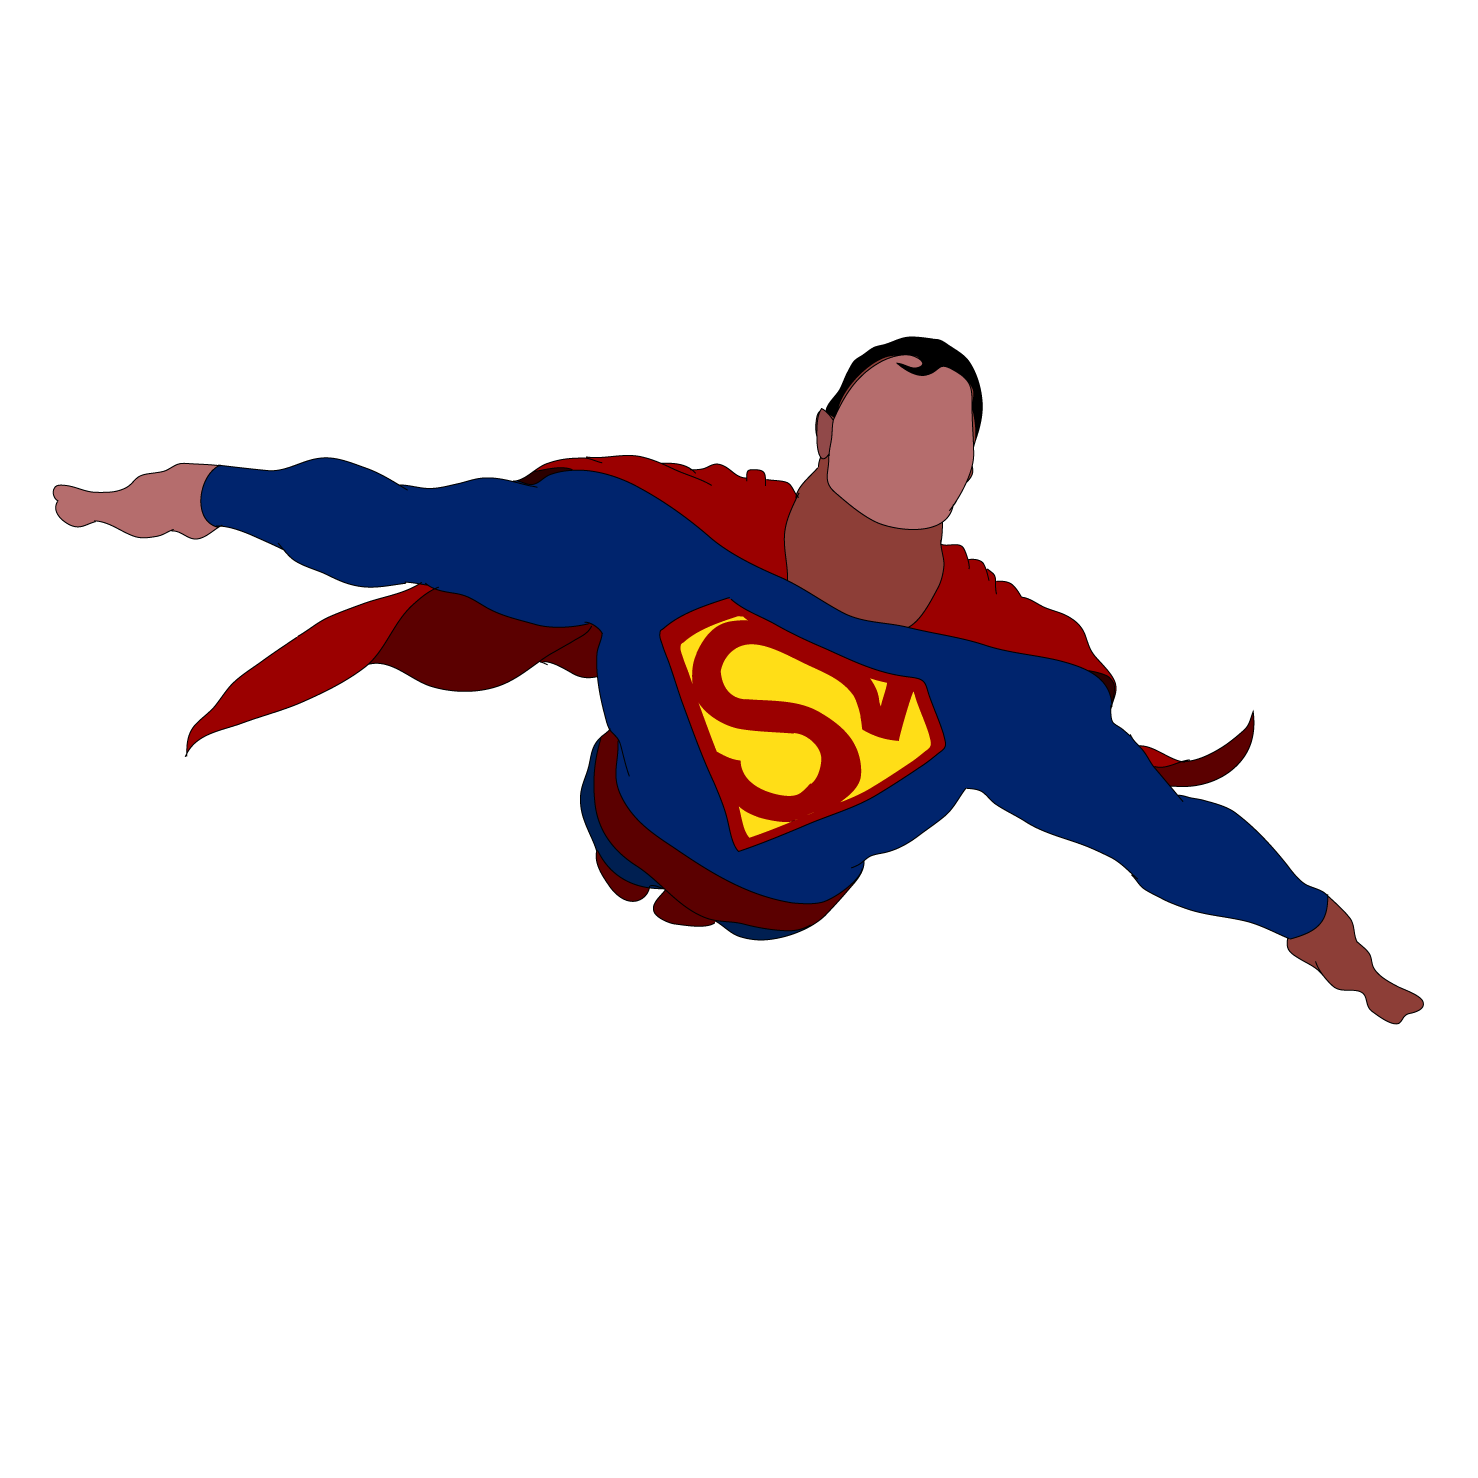 Another experiment in flatting in colors - this one is my man Supes. I had just read the Superman: Secret Identity and All Star Superman comics and couldn't stop drawing muscle-bound Kryptonians in tights.